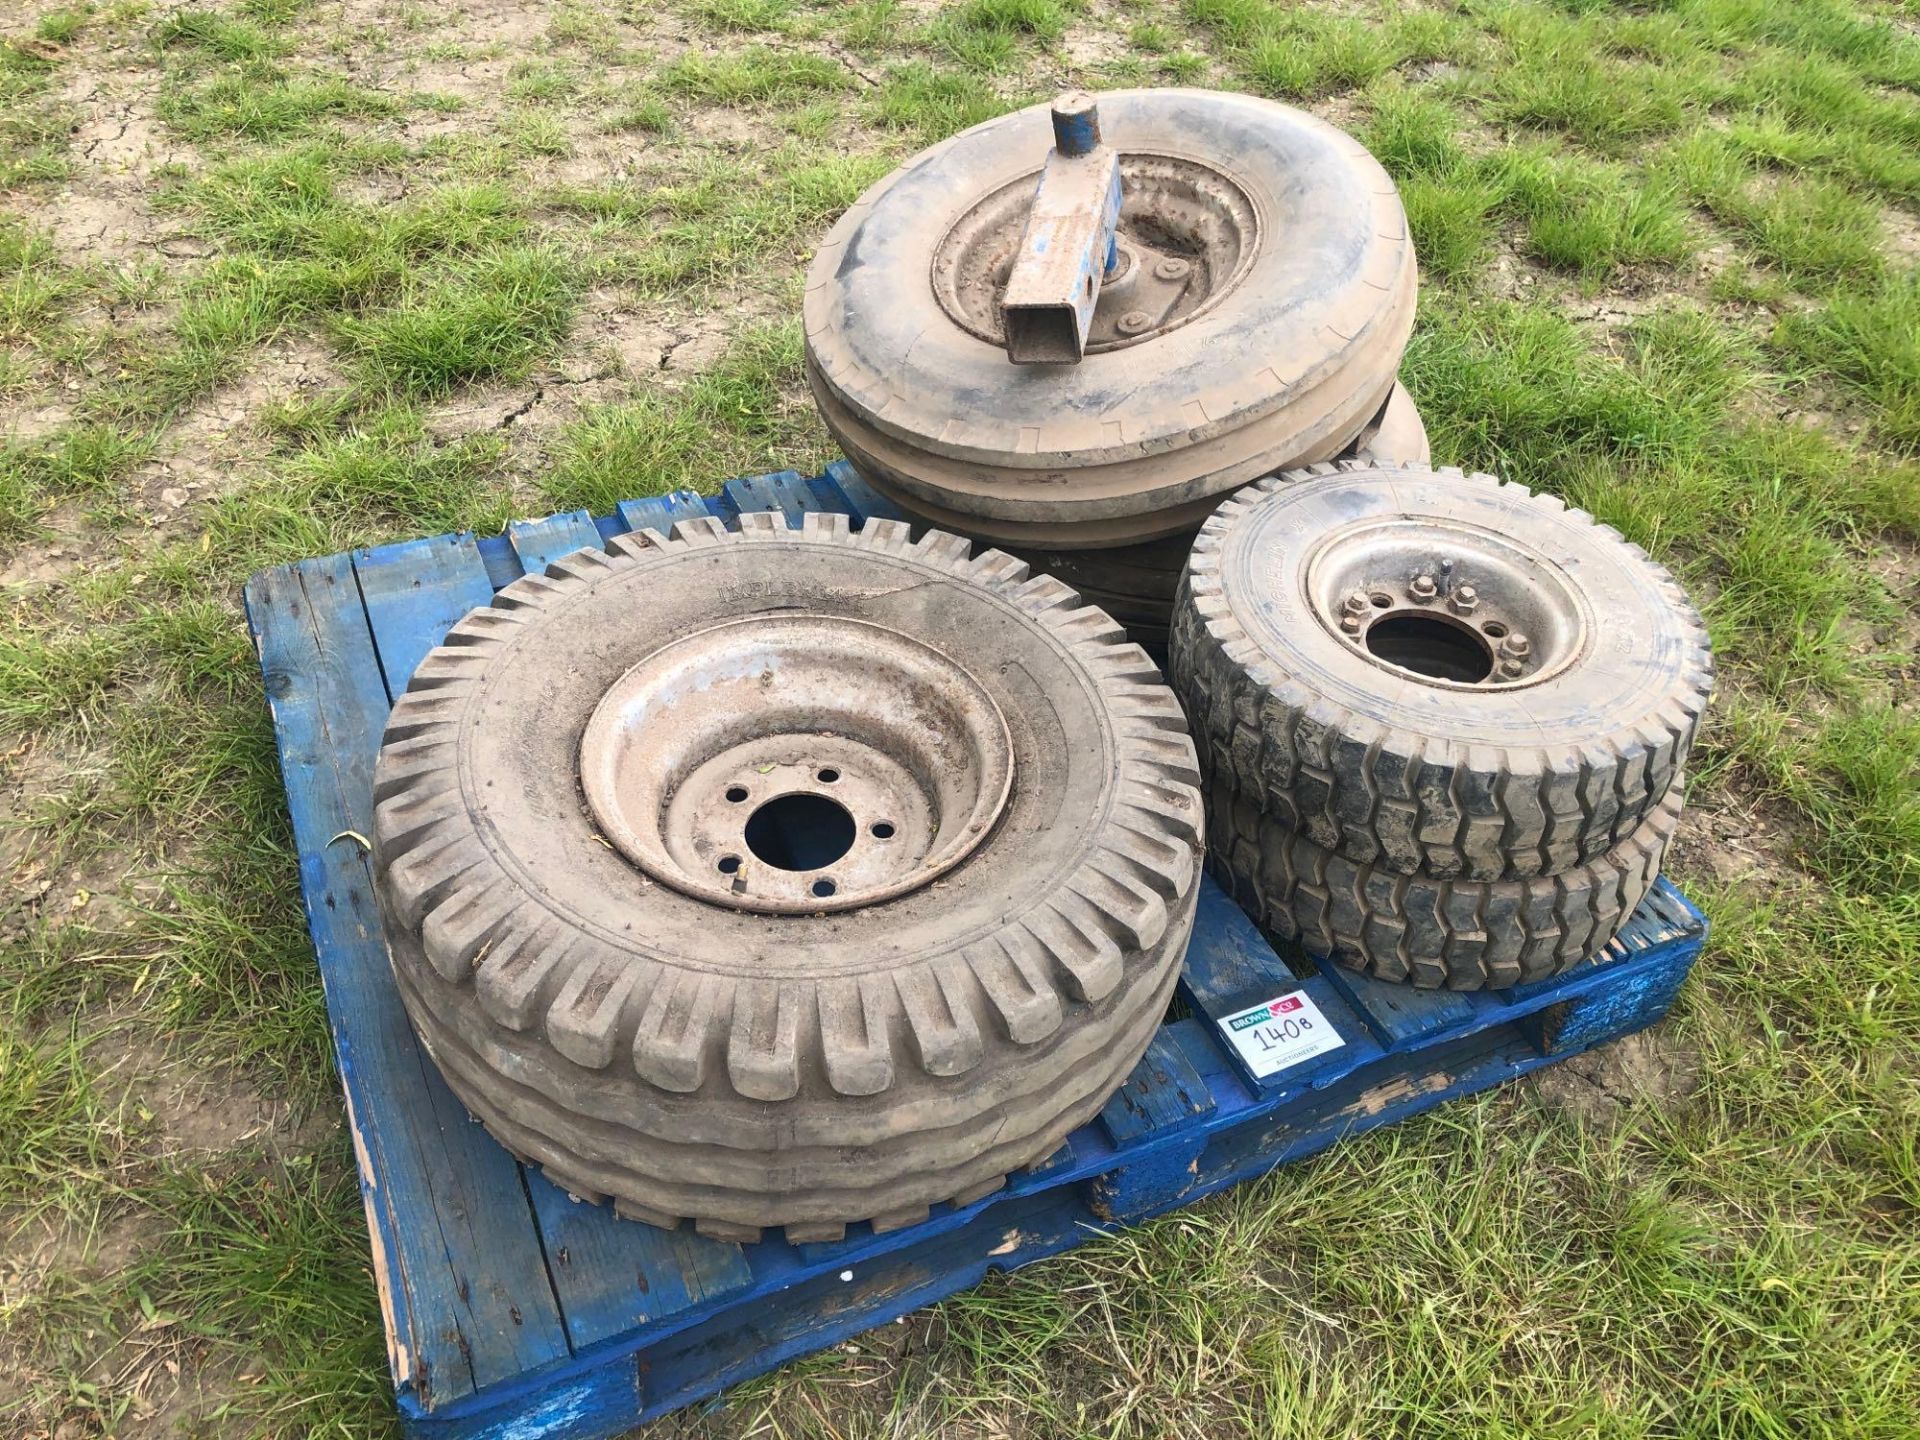 Quantity miscellaneous wheels and tyres